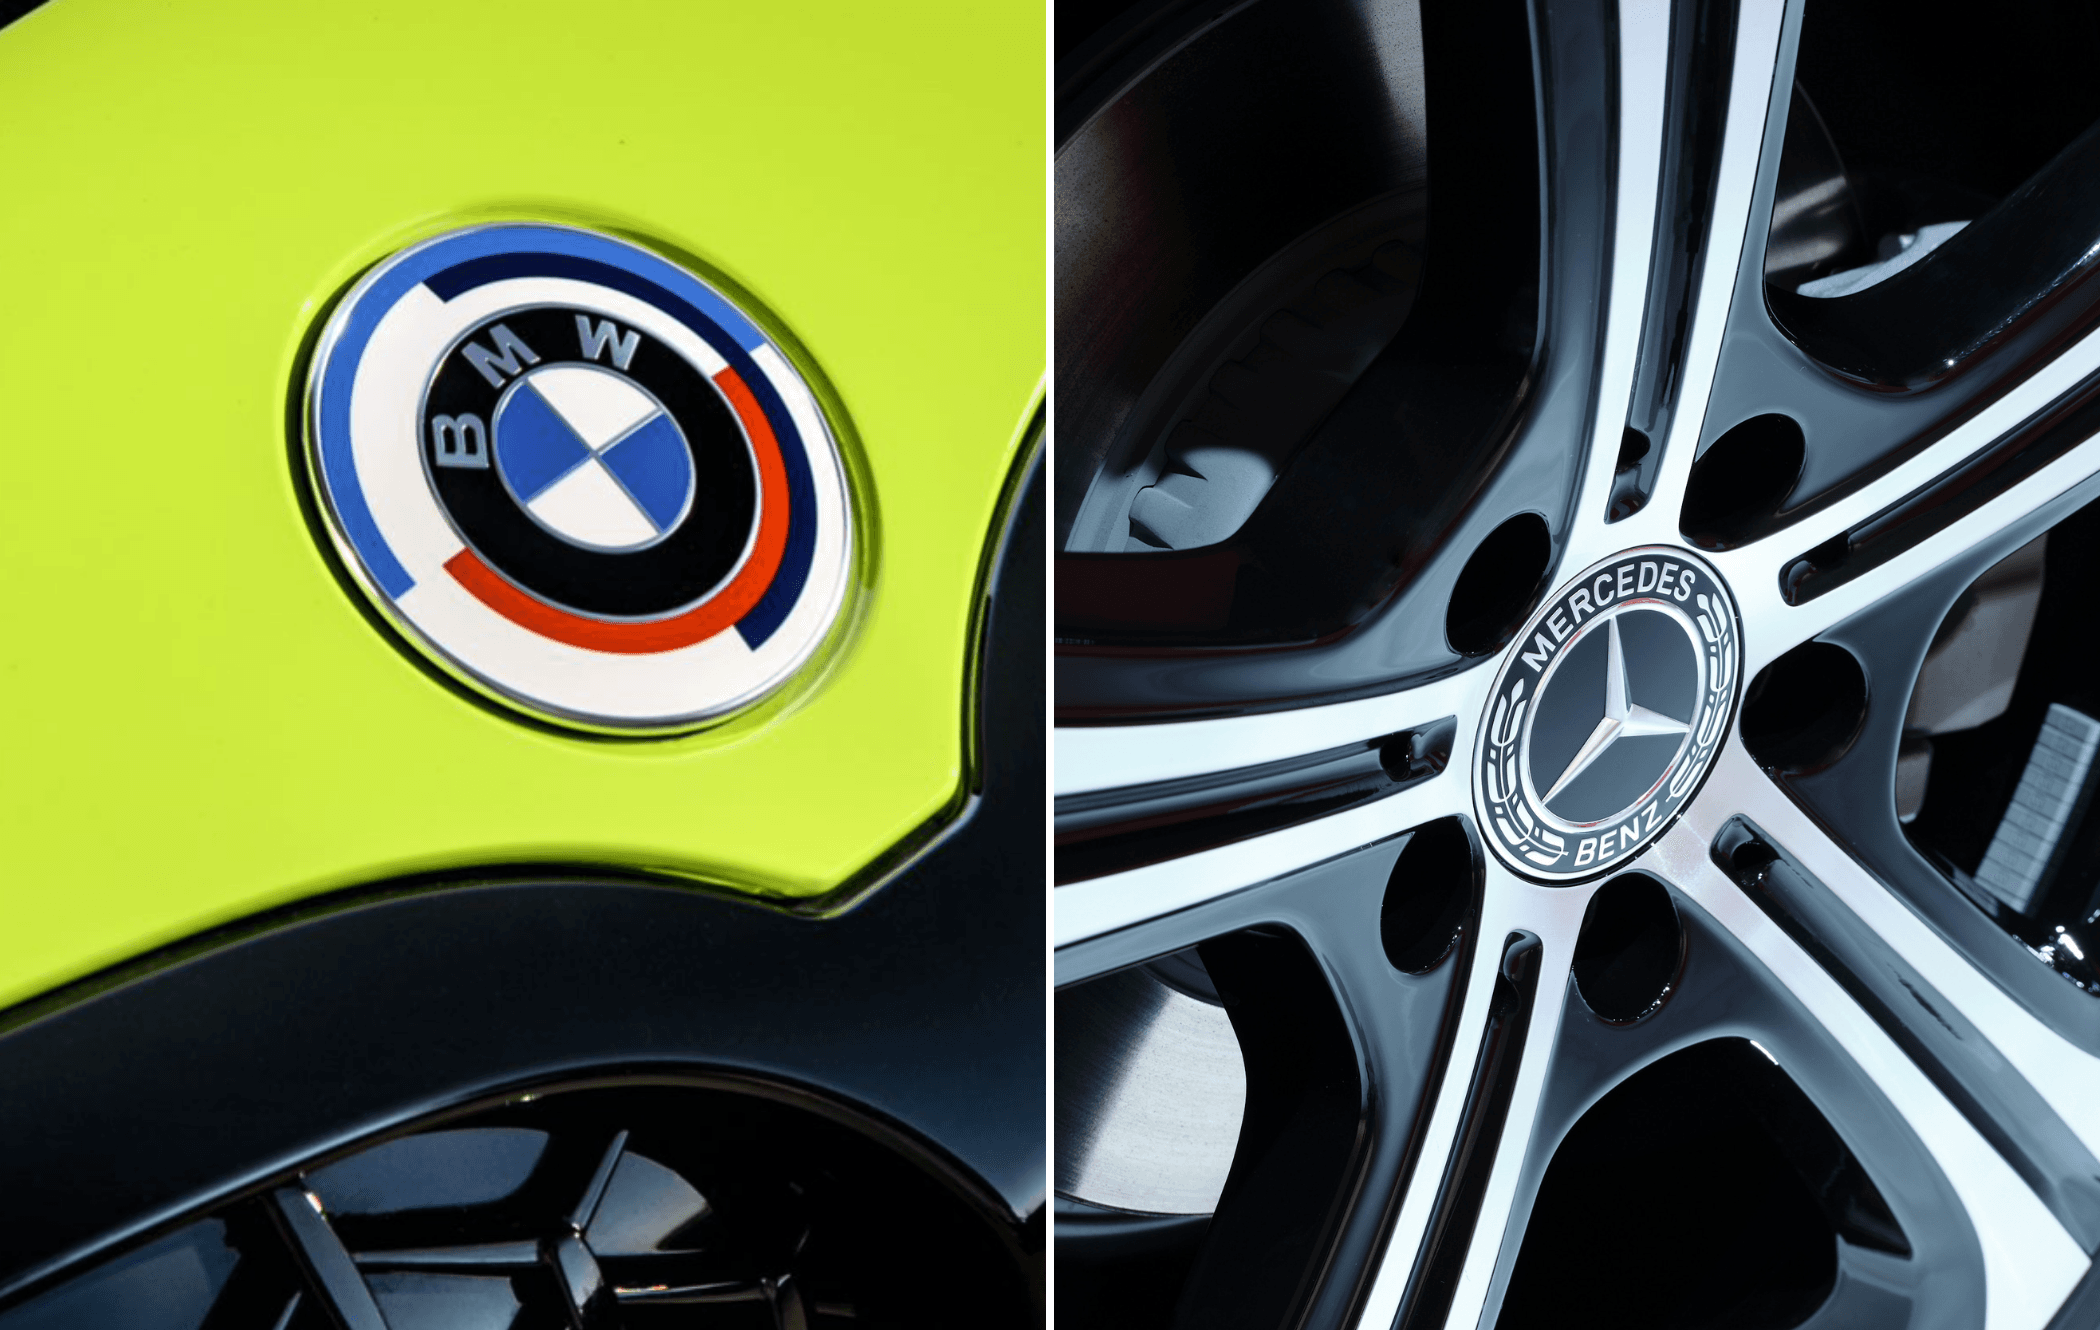 A comparison showing the BMW and Mercedes logos